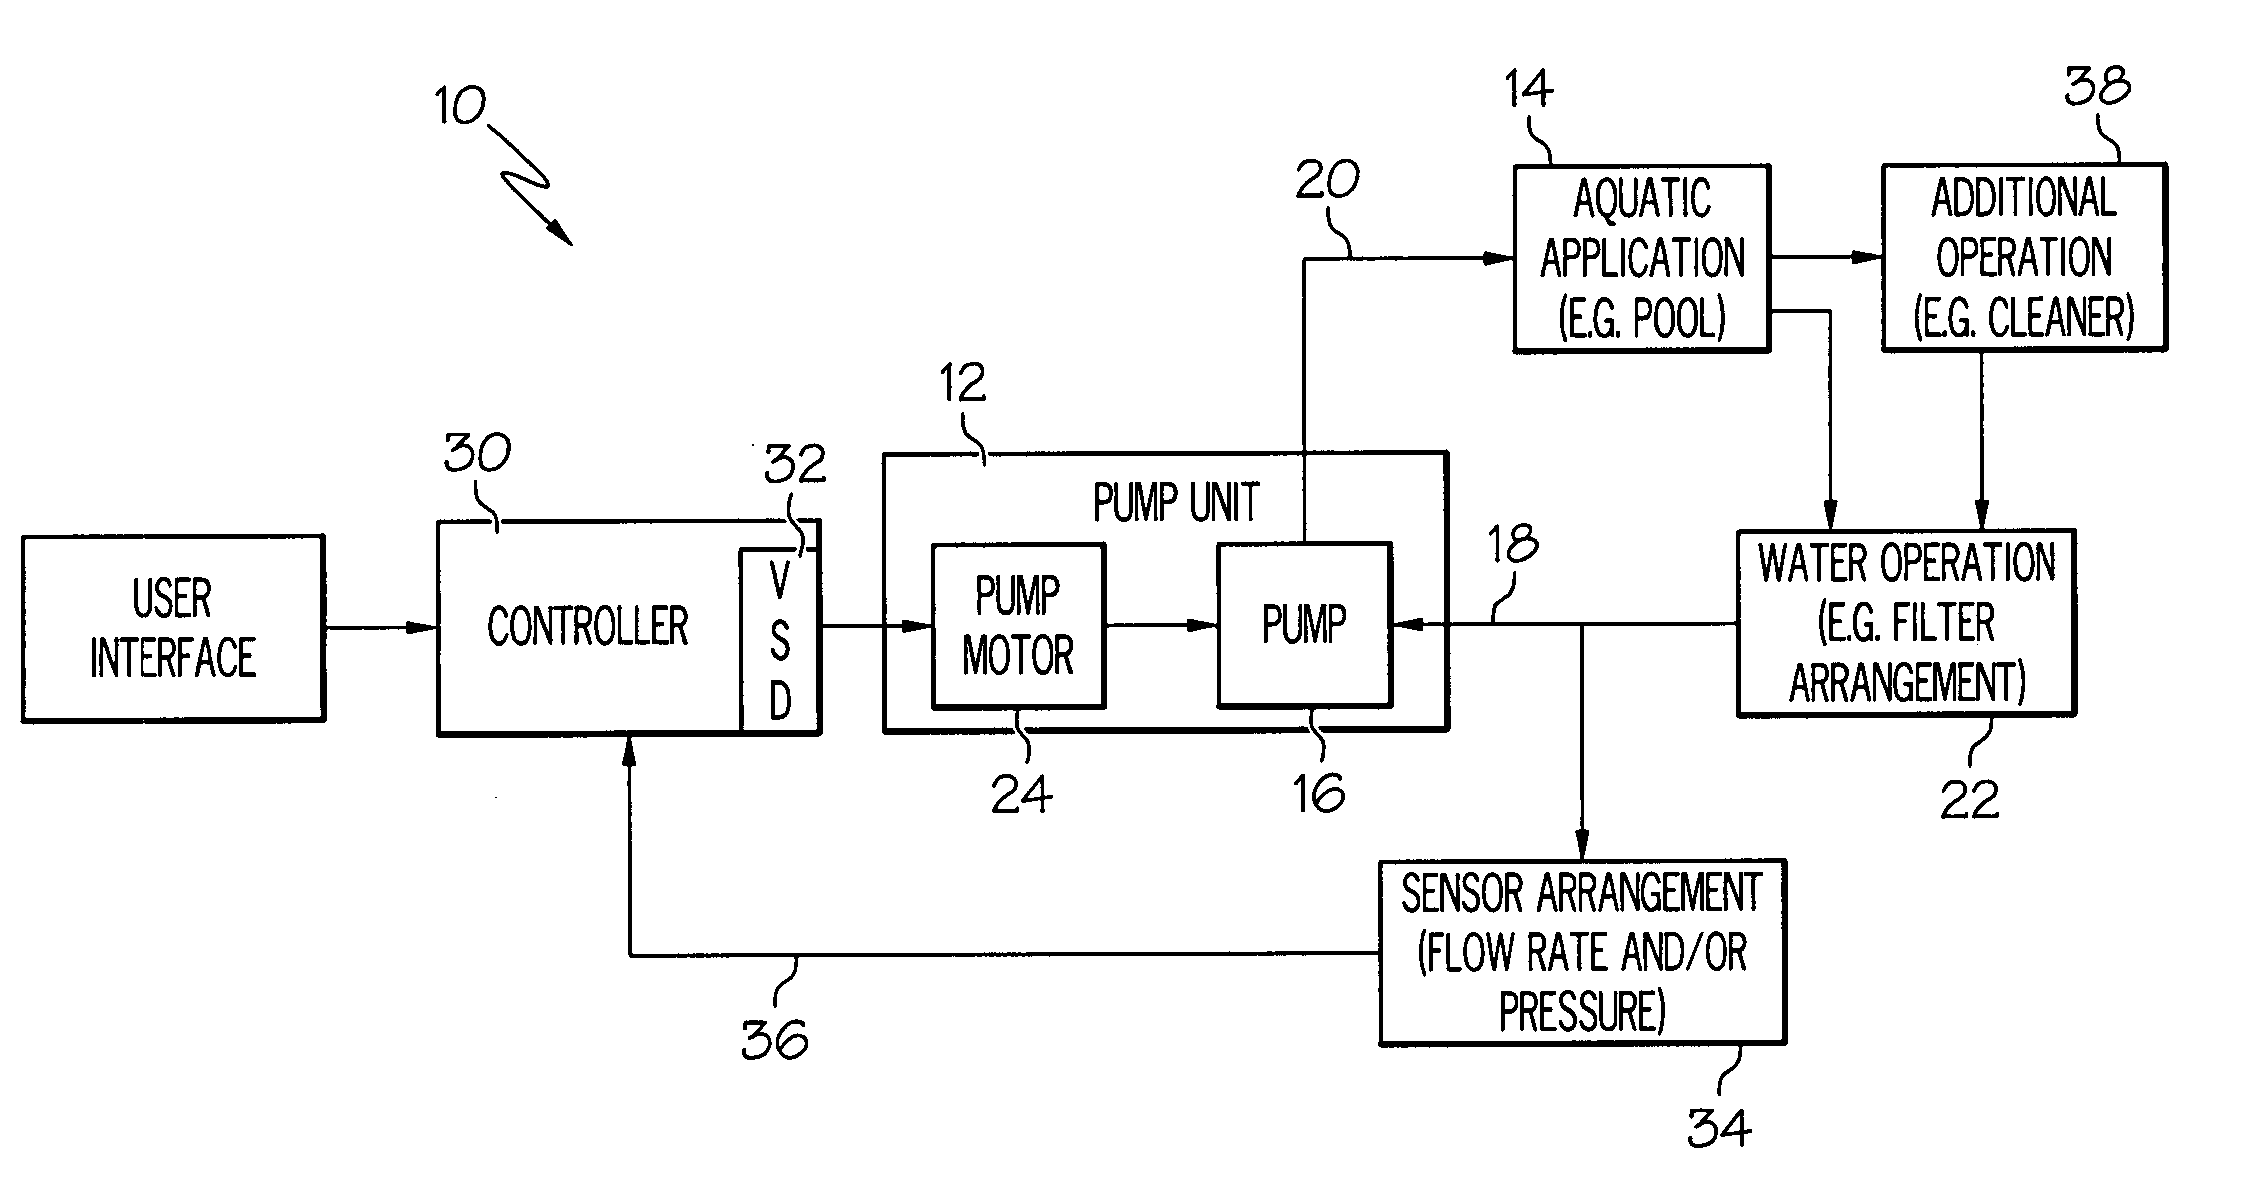 Control algorithm of variable speed pumping system